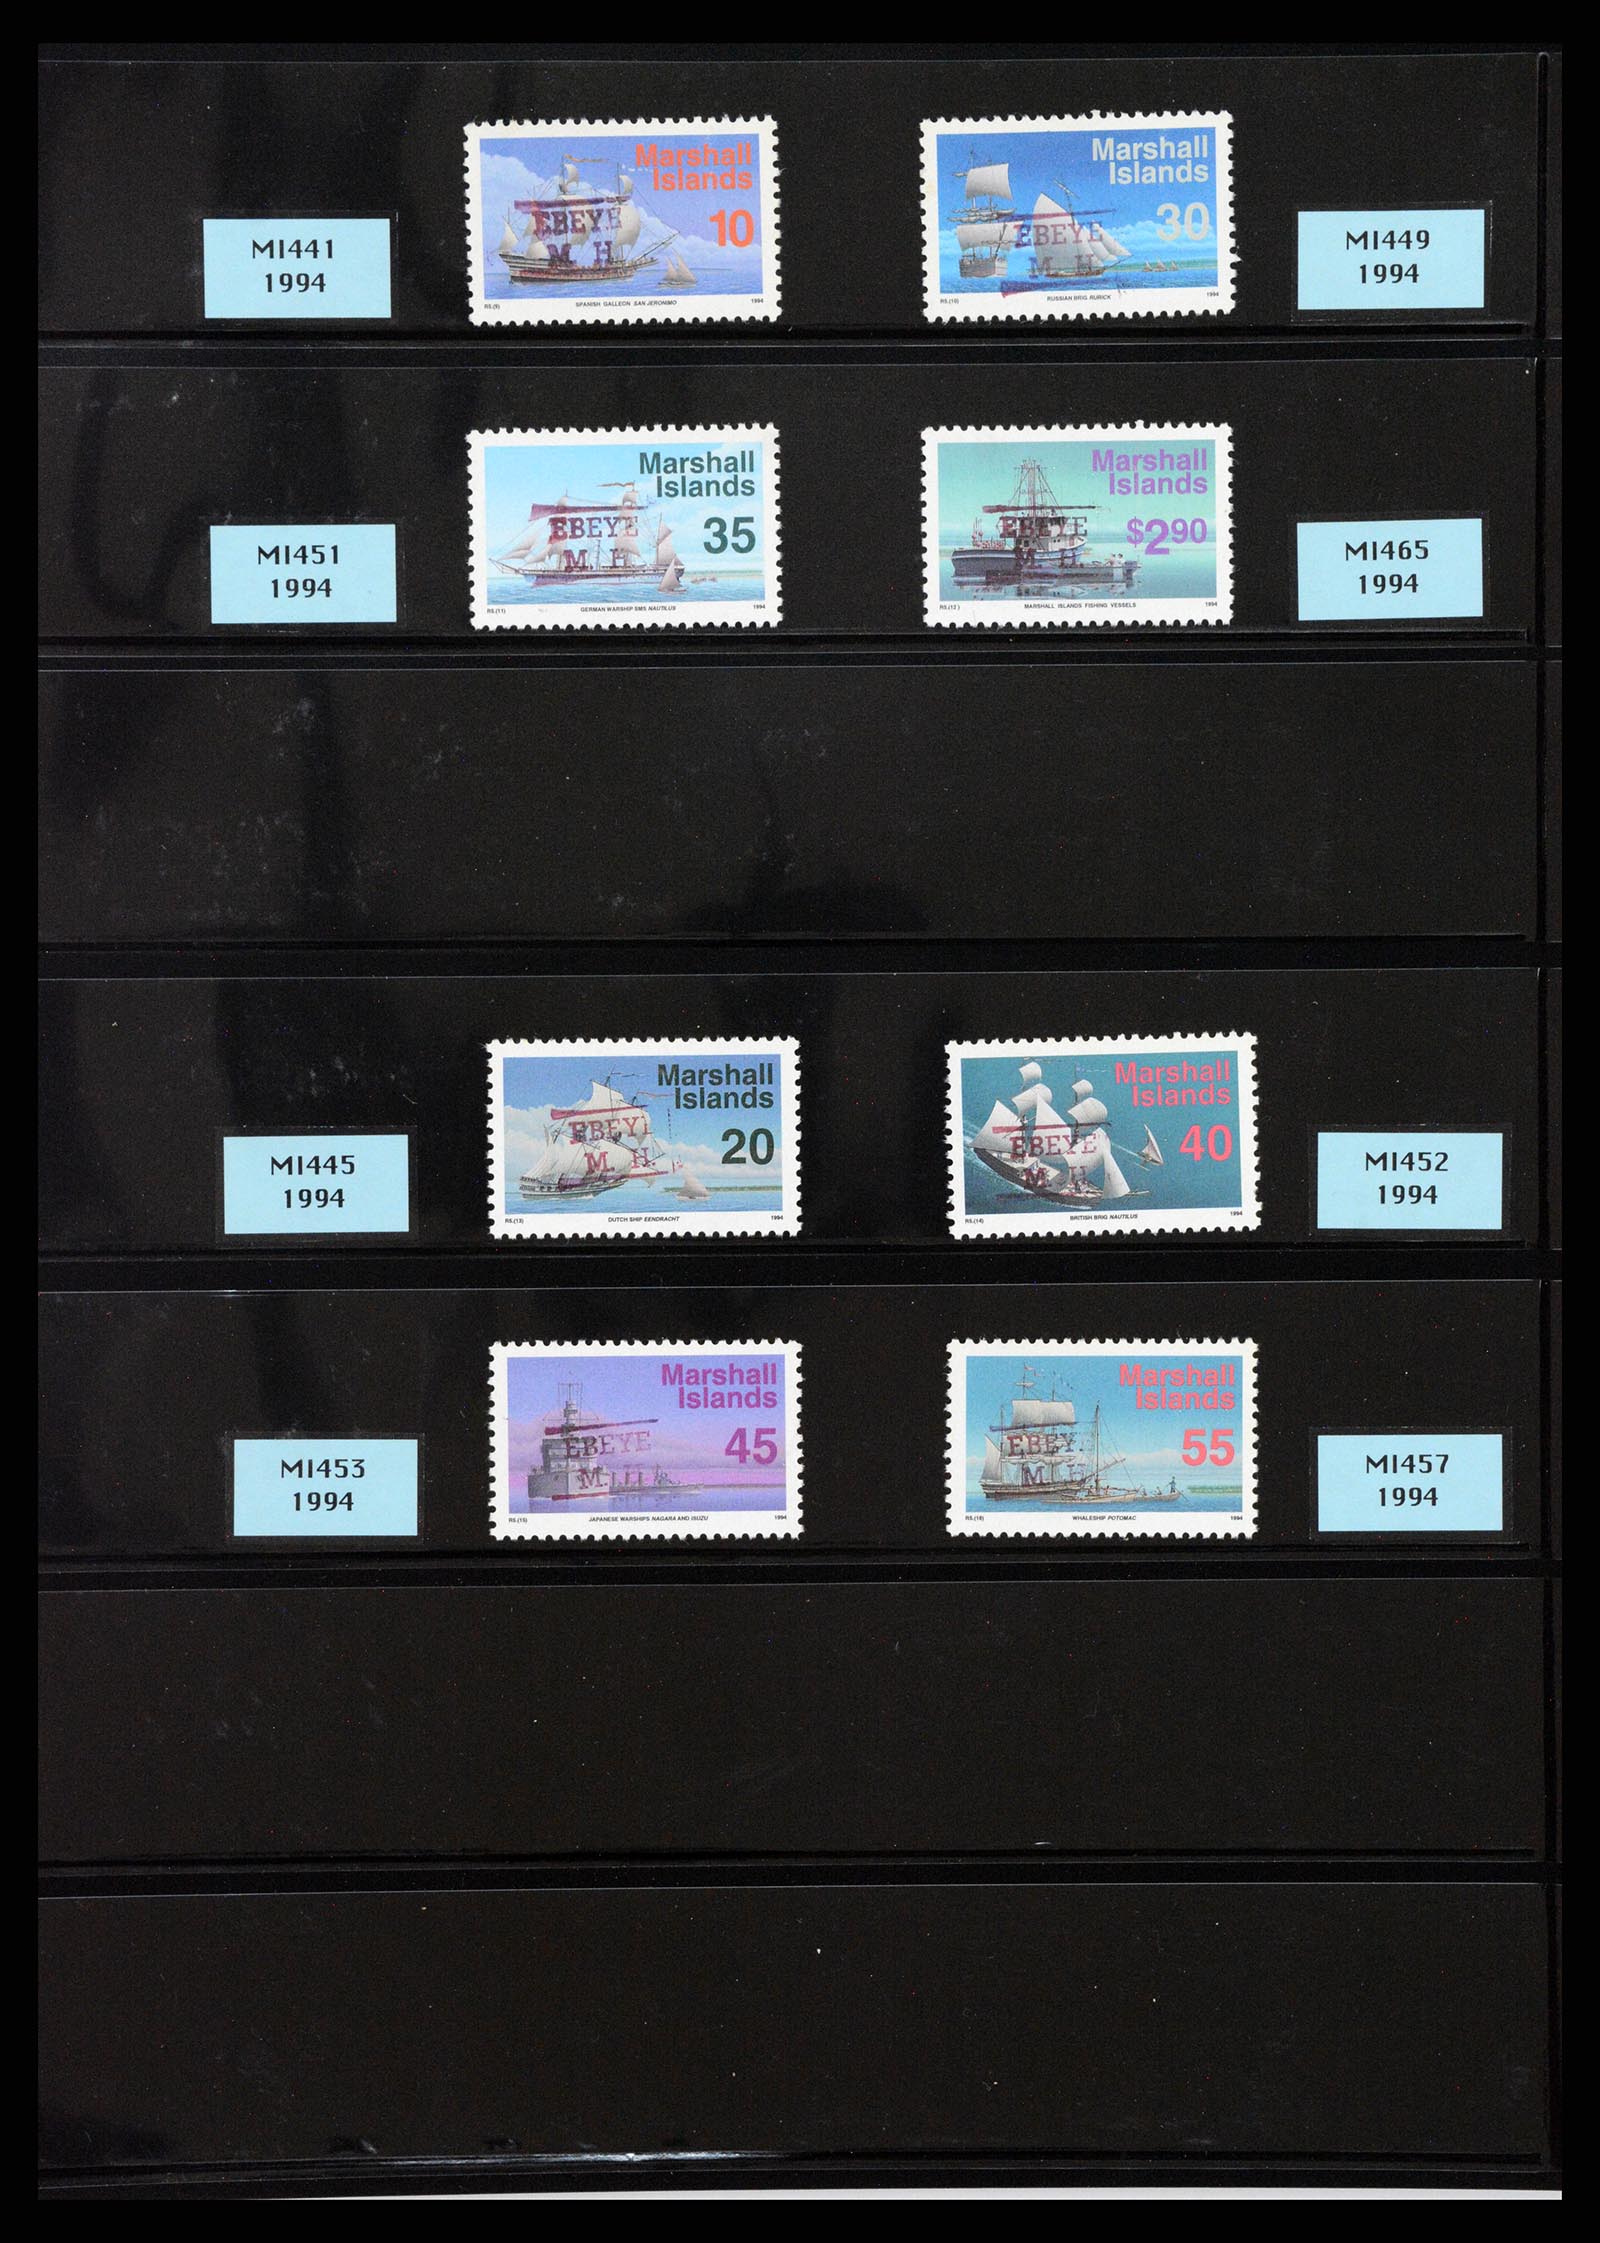 37736 005 - Stamp collection 37736 USA territories pre-cancels 1959-1995.